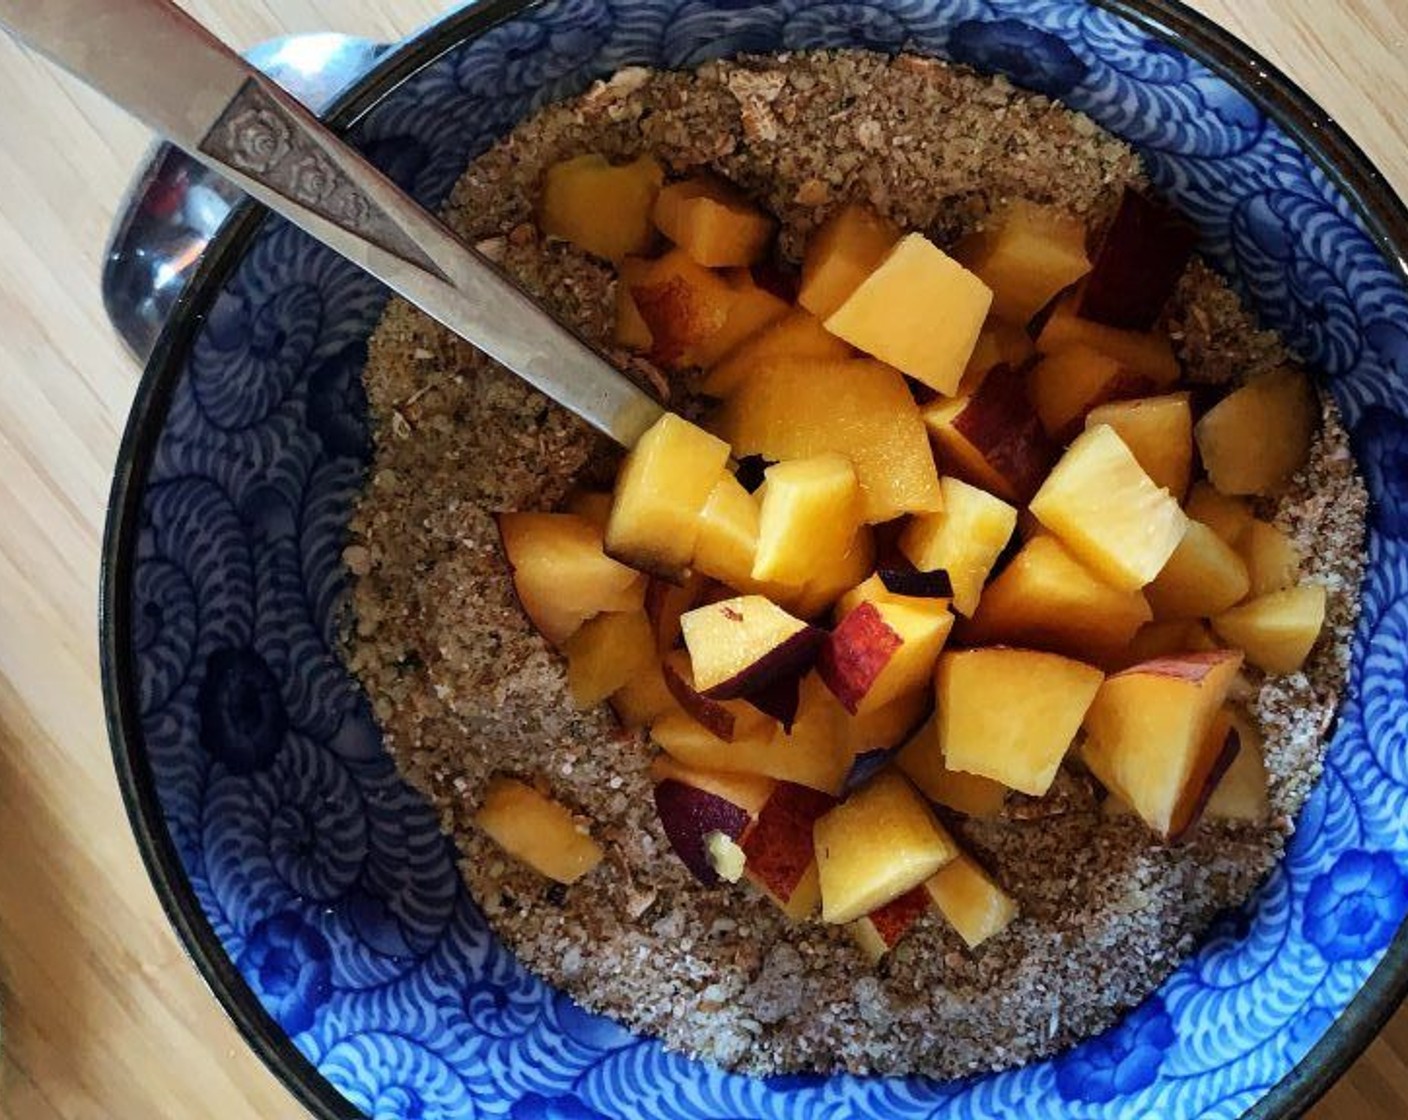 step 3 In a bowl combine powdered hemp and oats, Granulated Erythritol (2 Tbsp), Ground Flaxseed (1 Tbsp), Baking Powder (1/2 tsp), Ground Cinnamon (1/4 tsp), and Himalayan Rock Salt (1/8 tsp). Stir all the dry ingredients together then add the Peach (2/3 cup).